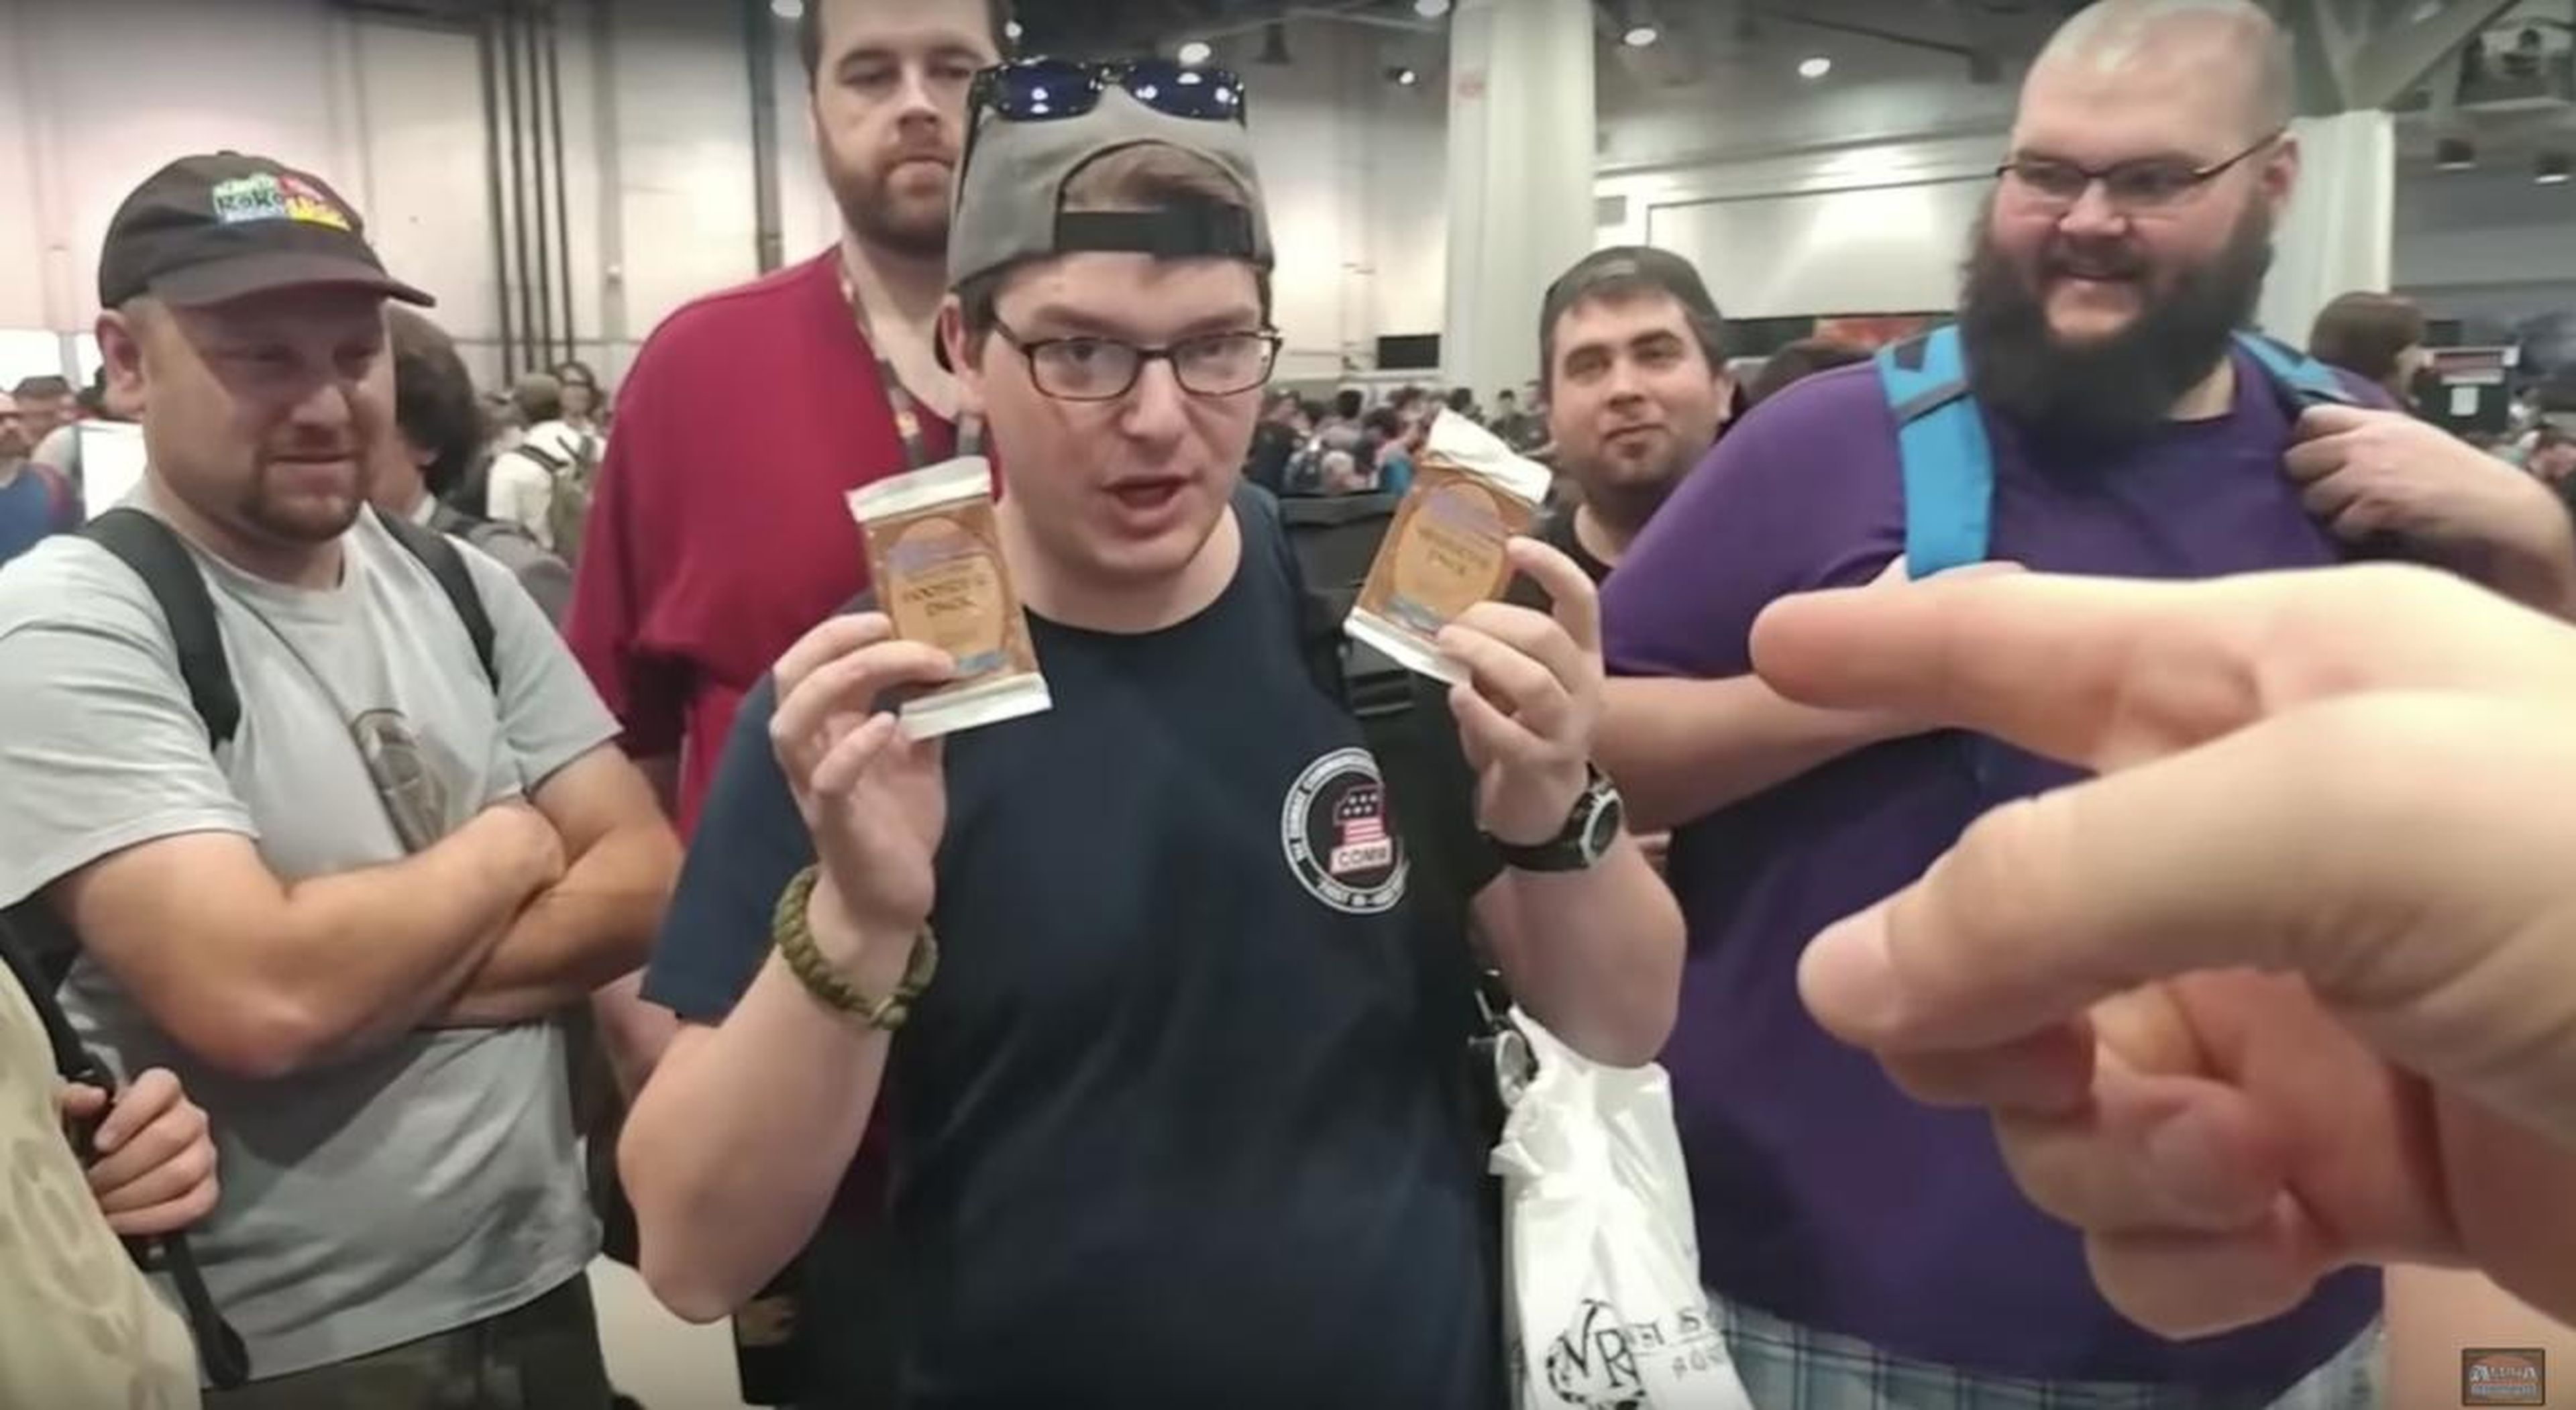 A man holding up packs of "Magic: The Gathering" cards at a Las Vegas showcase in April.